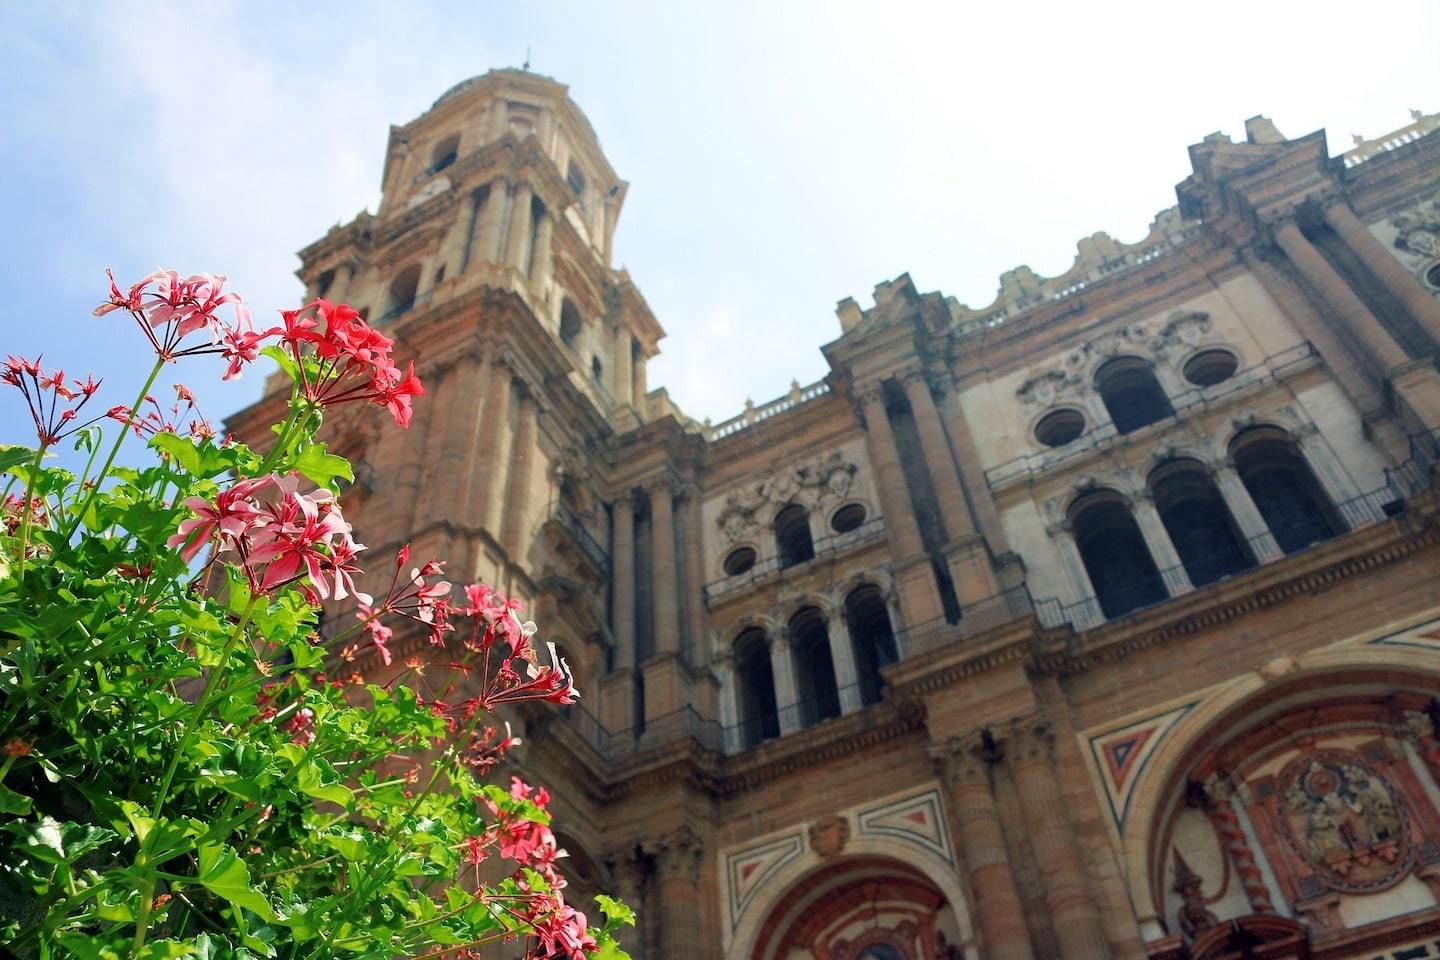 view looking up at the malaga cathedral, focused on pink flowers